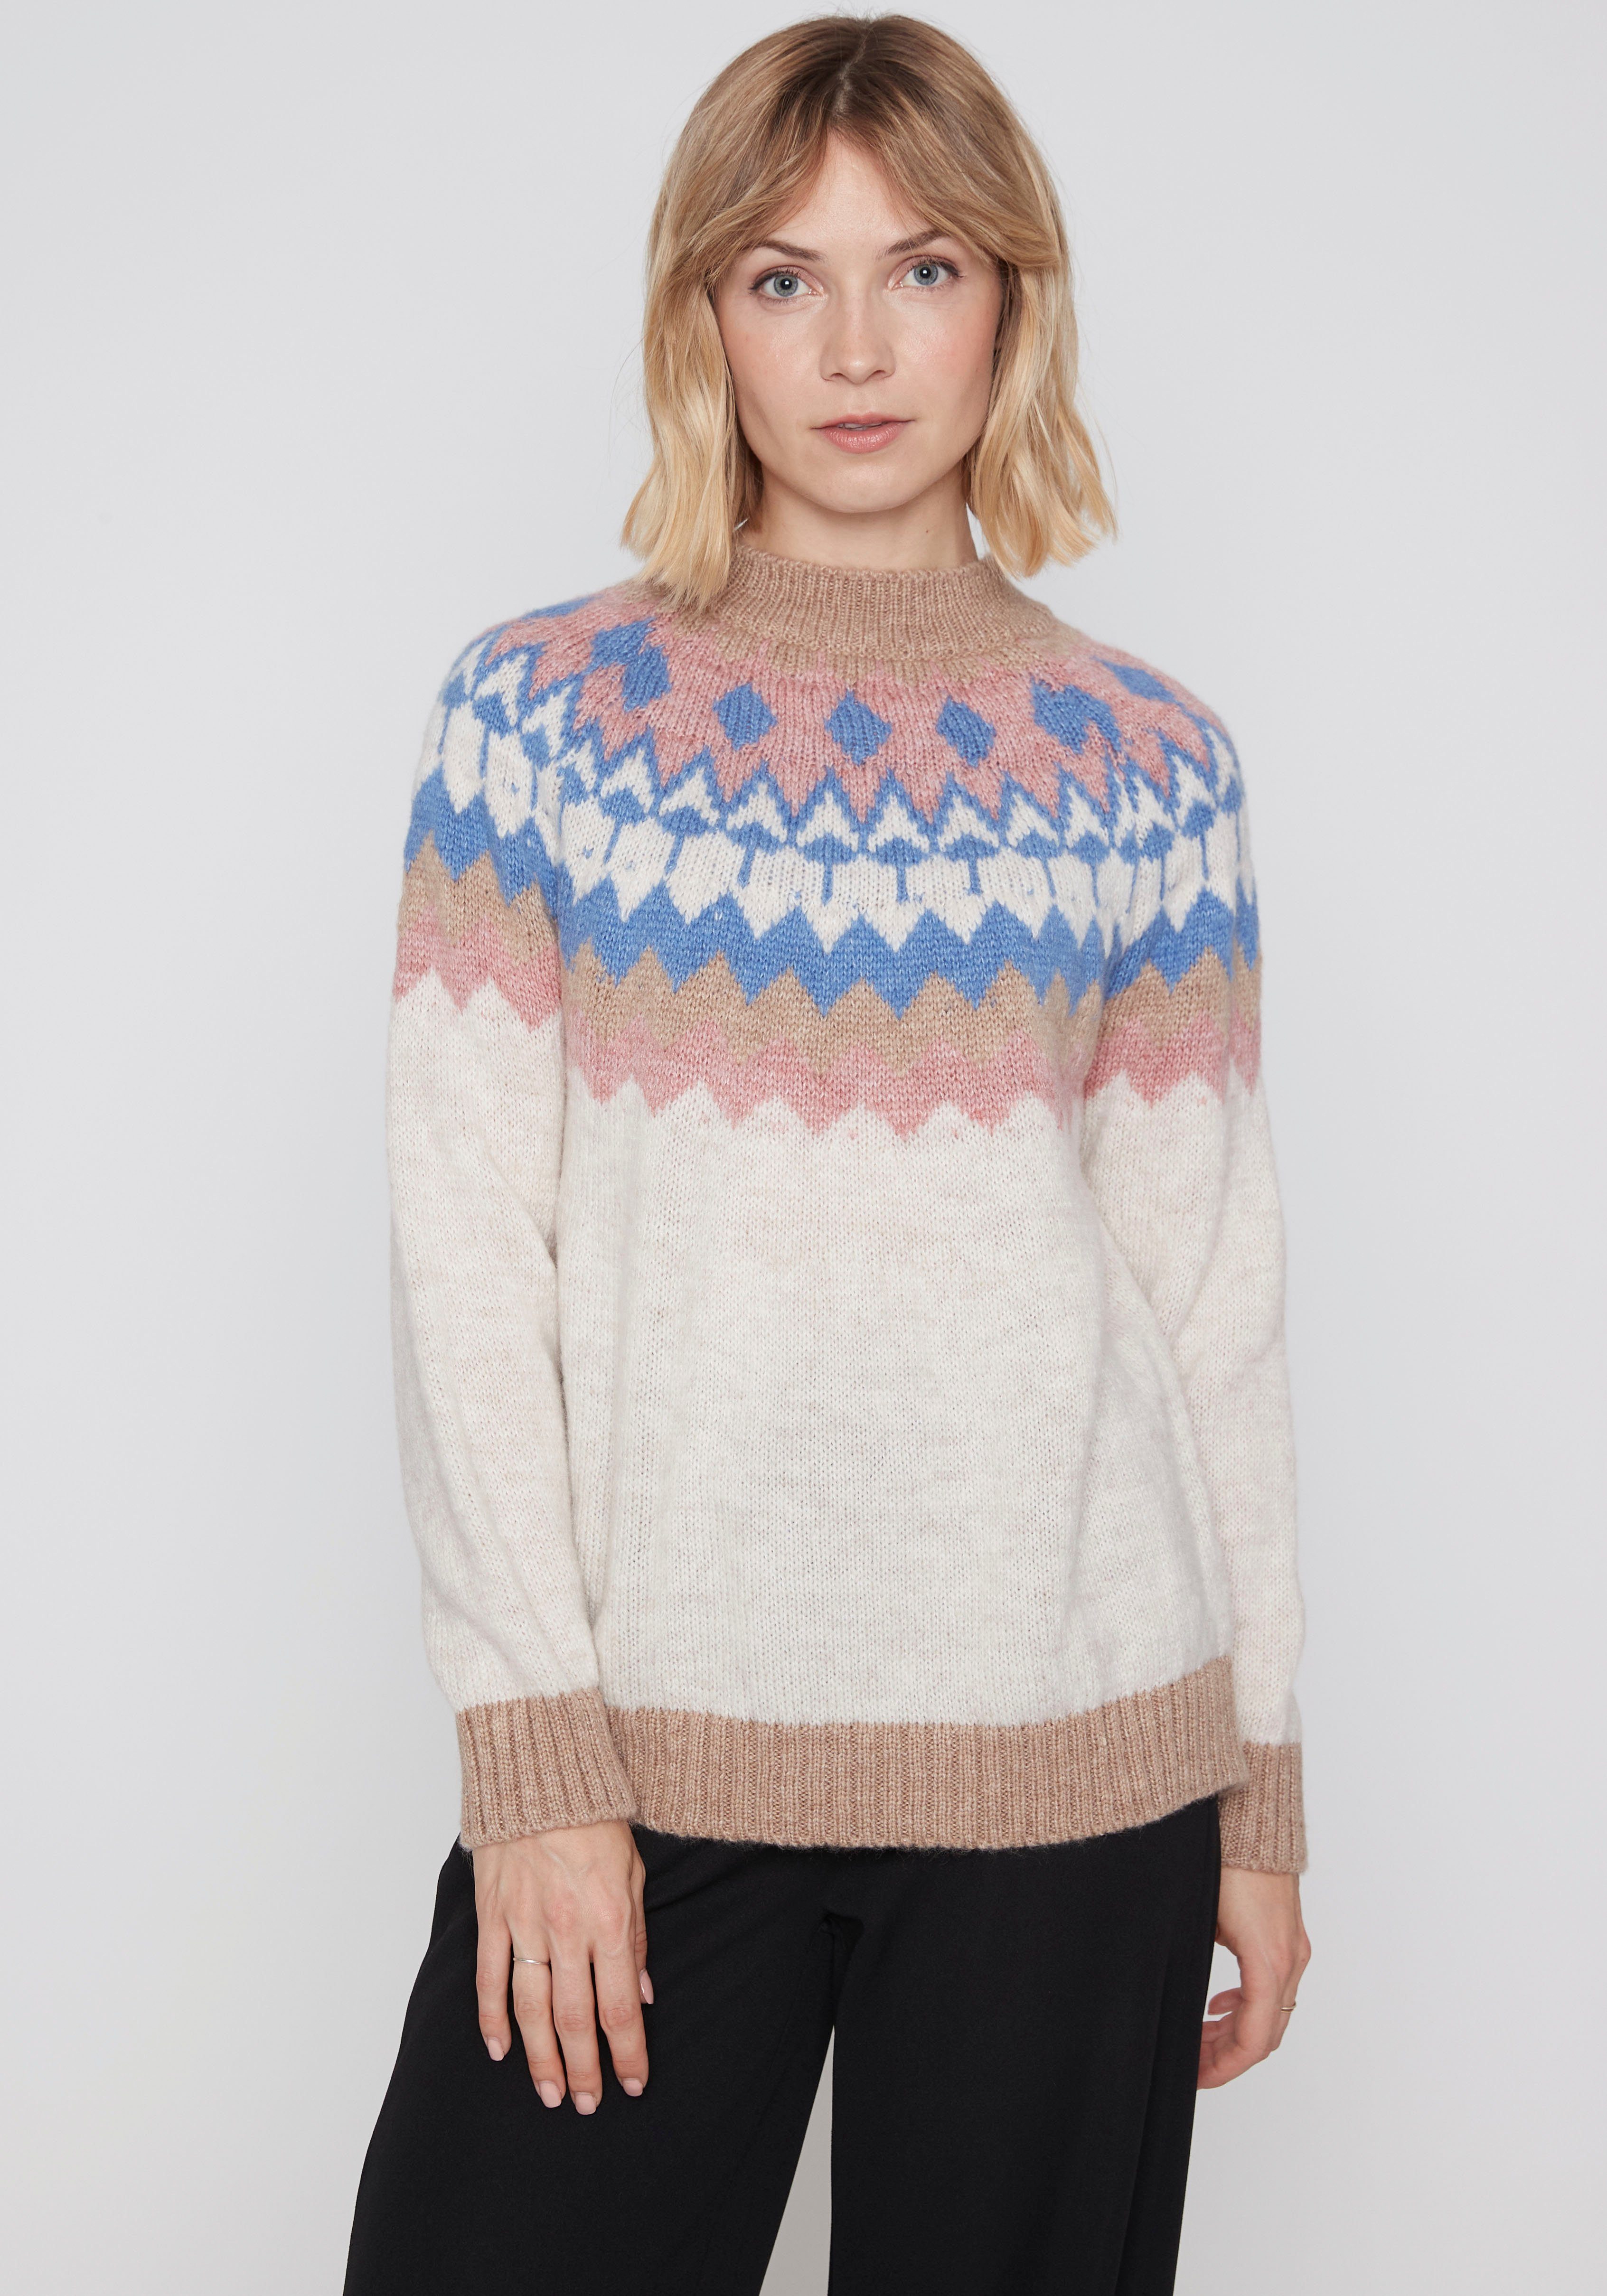 HaILY'S Strickpullover LS A SK Ma44ni